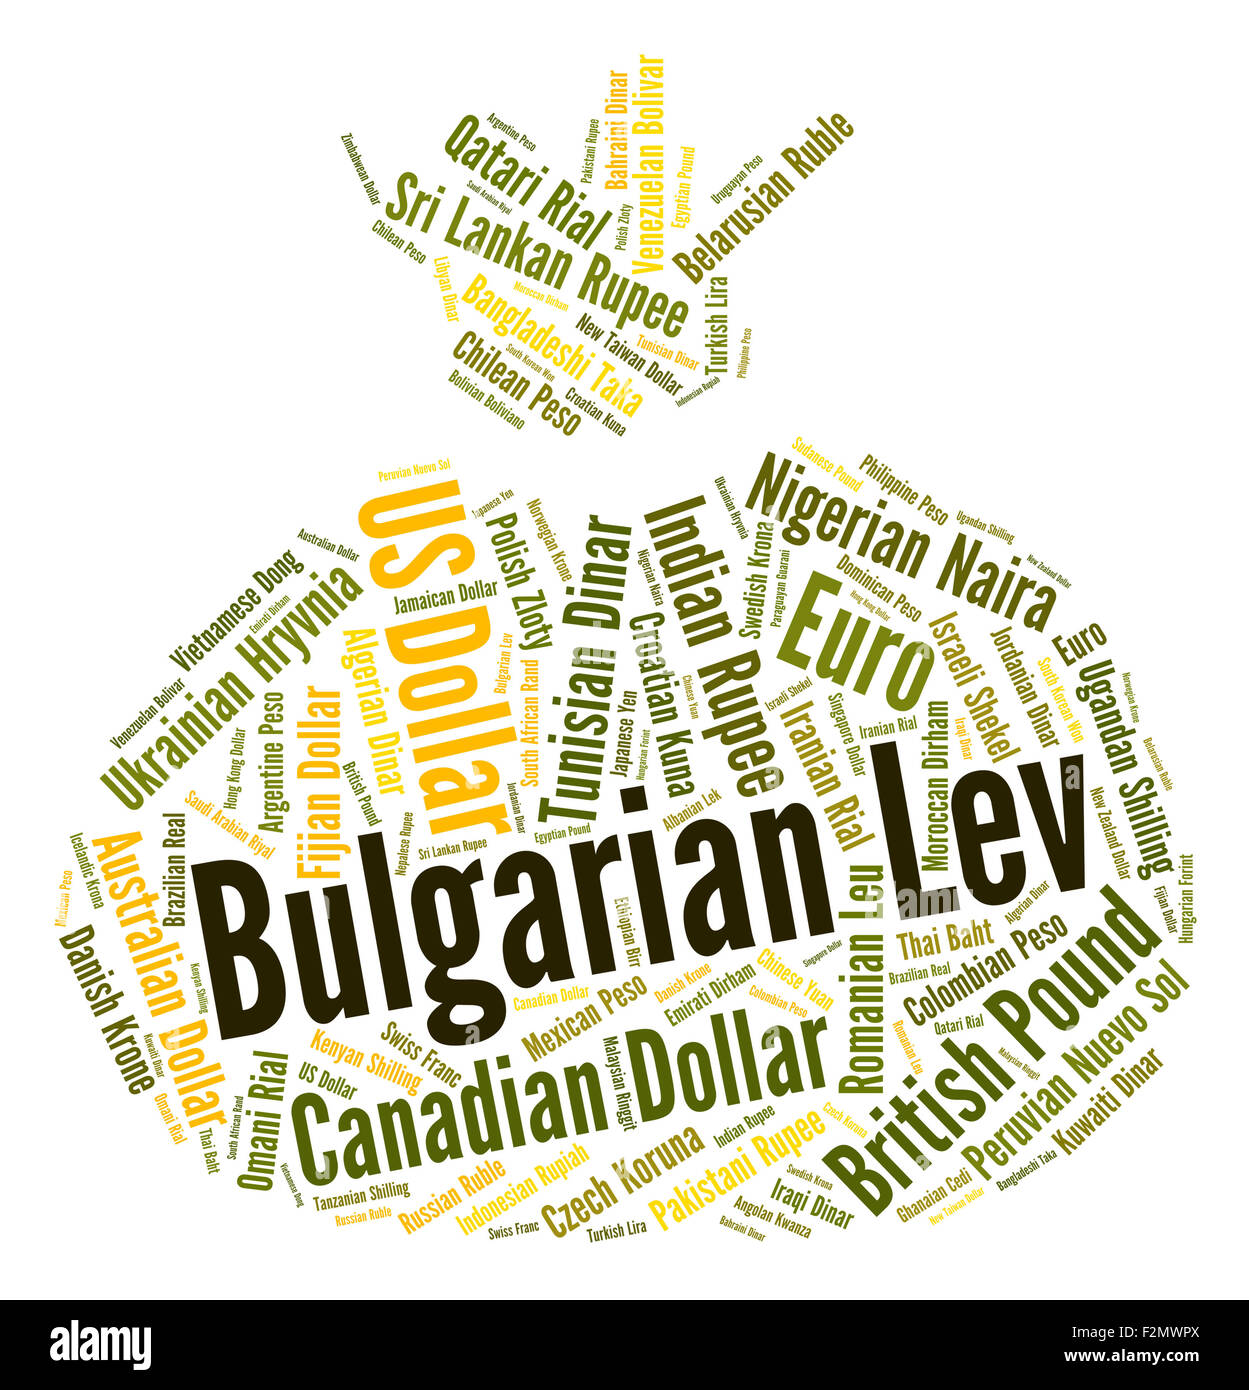 Bulgarian Lev Showing Forex Trading And Text Stock Photo